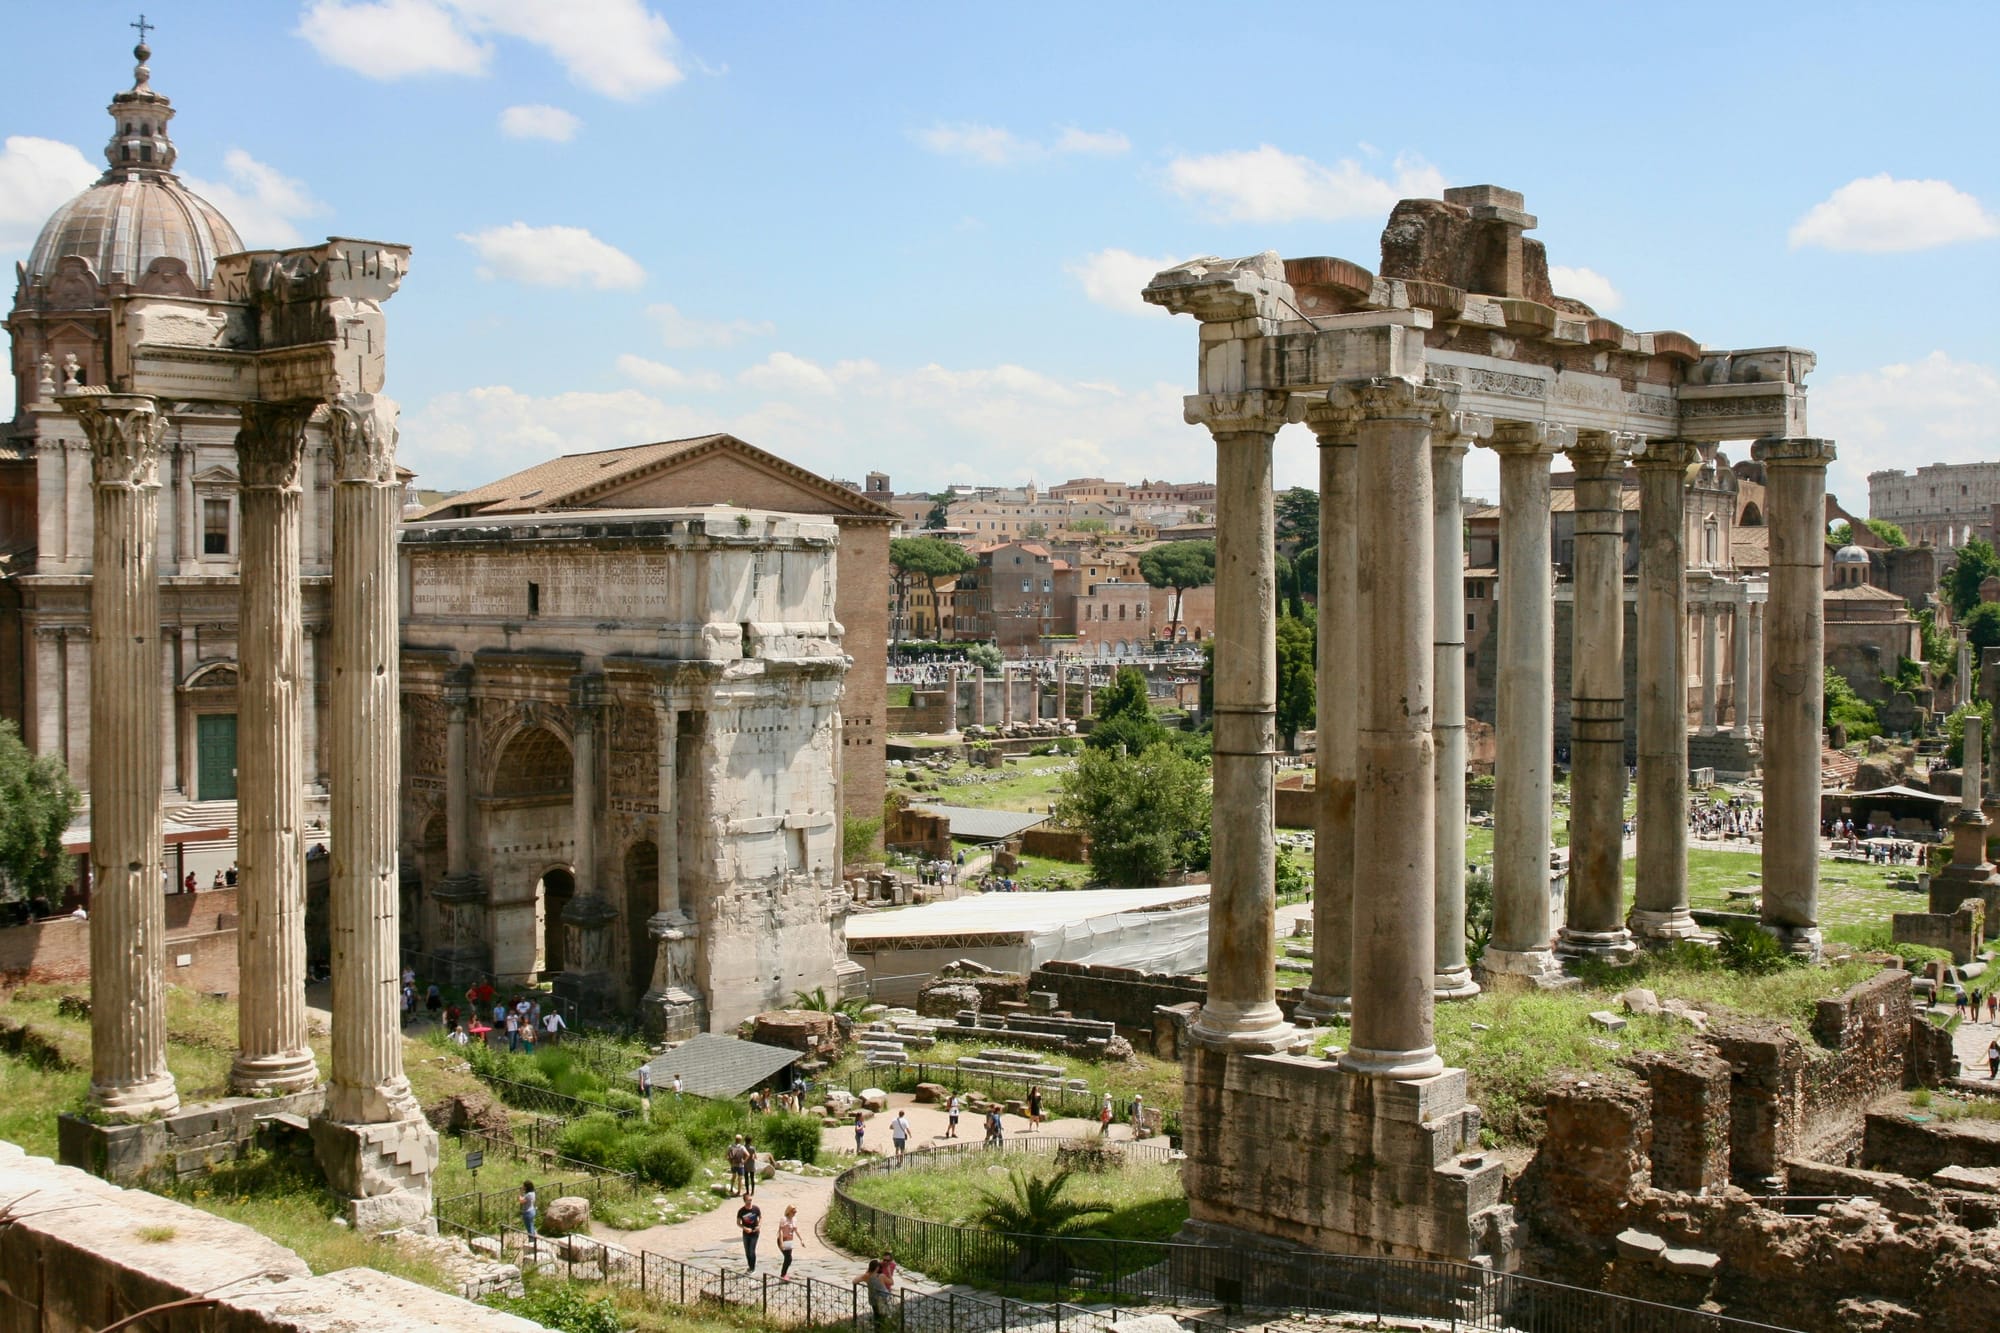 The Roman Forum is an attraction in Rome - 20% accessible for wheelchair-users